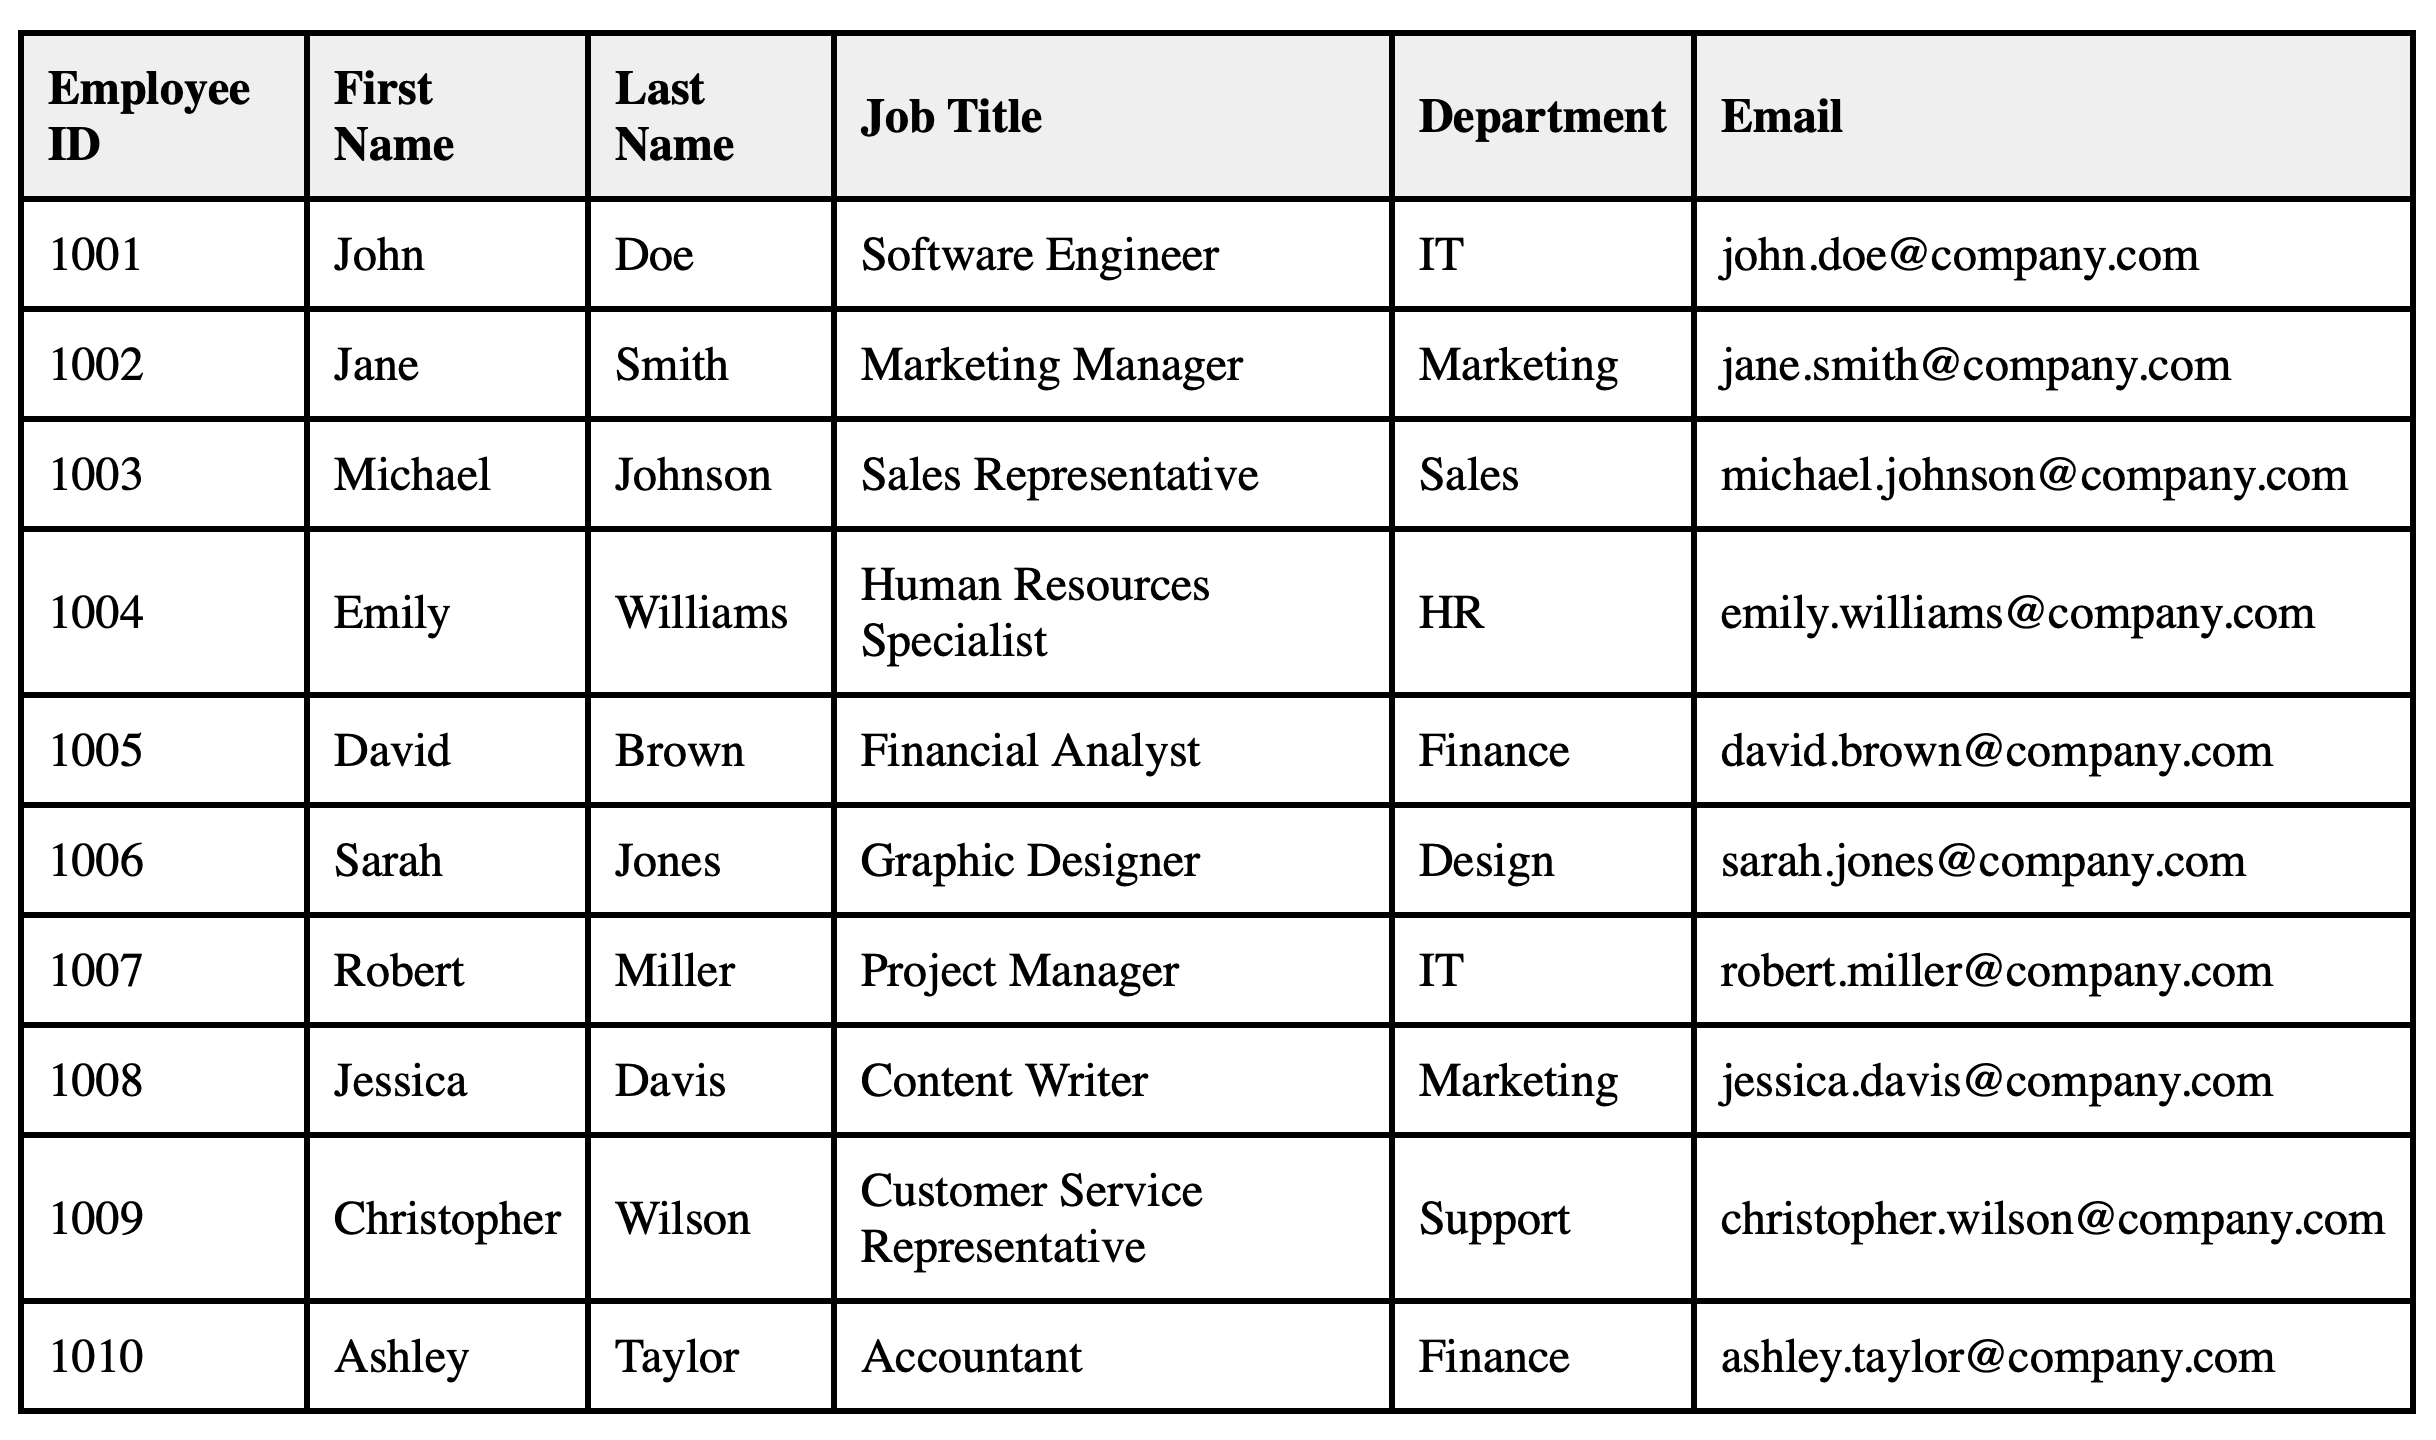 Example of an employee database shown in a table